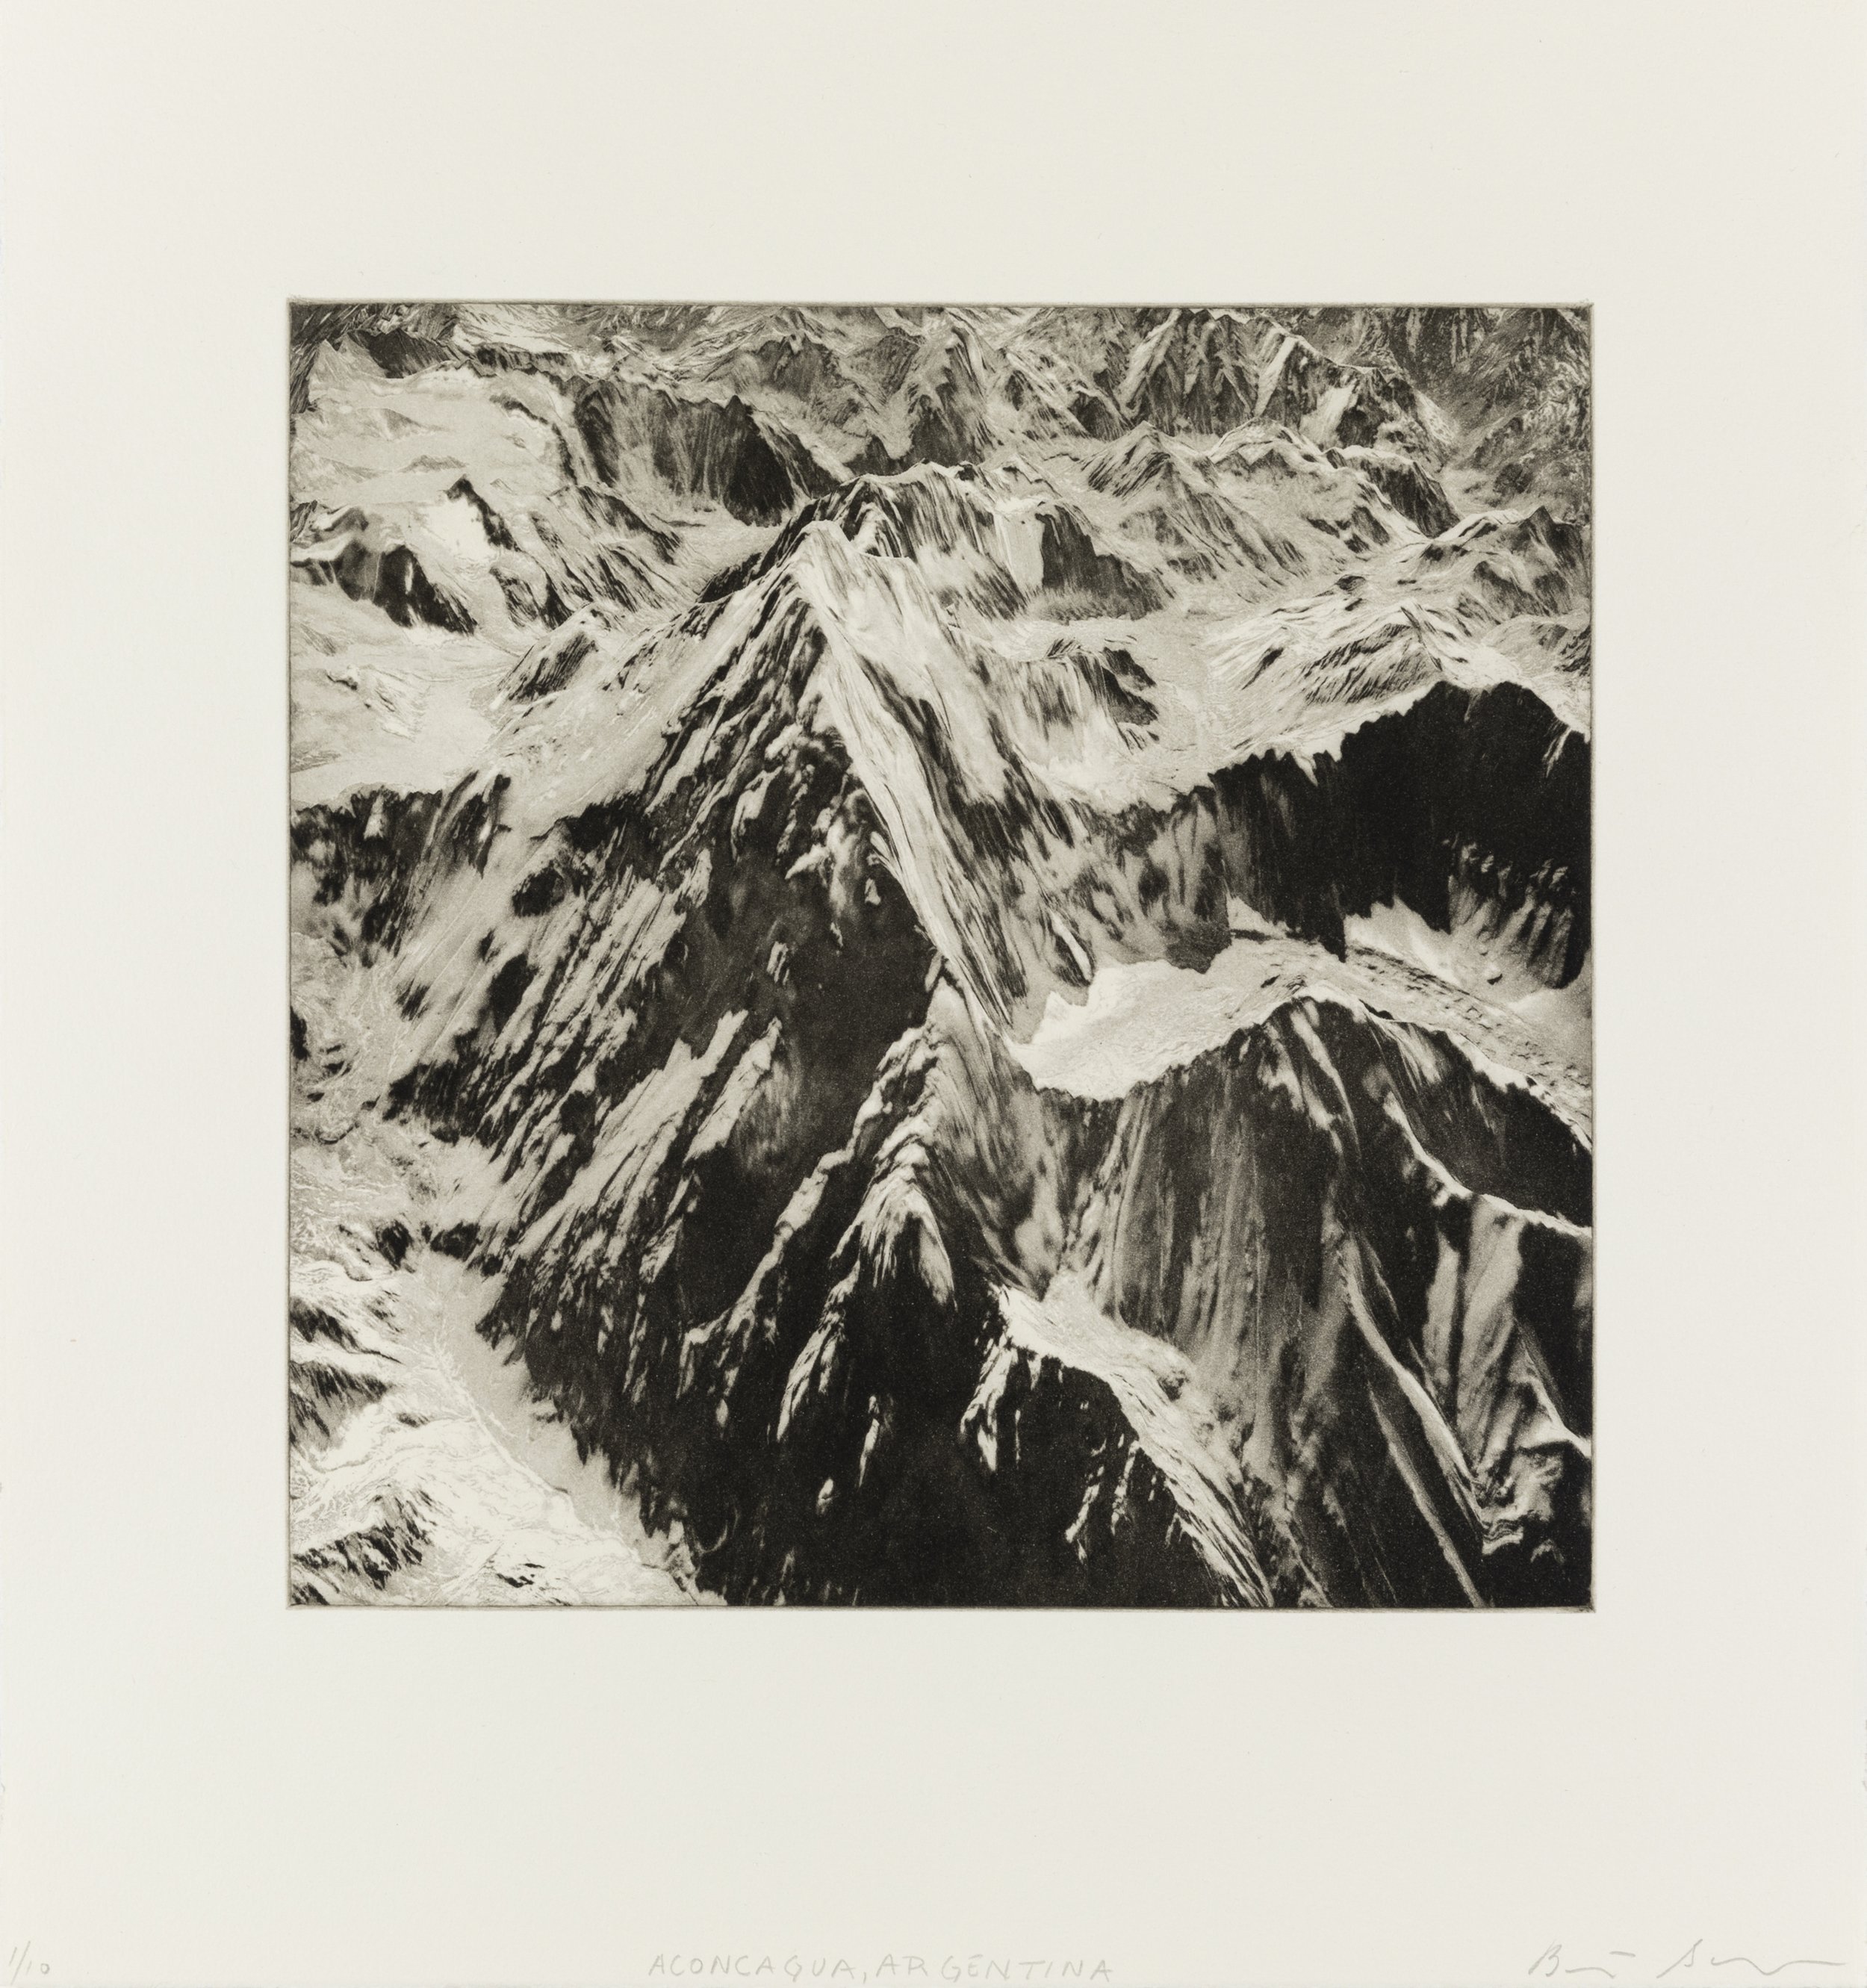    Anconcagua, Argentina, 2021    Copperplate photogravure etching on cotton rag paper, plate size; 10.6 x 10.6, paper size; 16 x 15.5, edition 10  